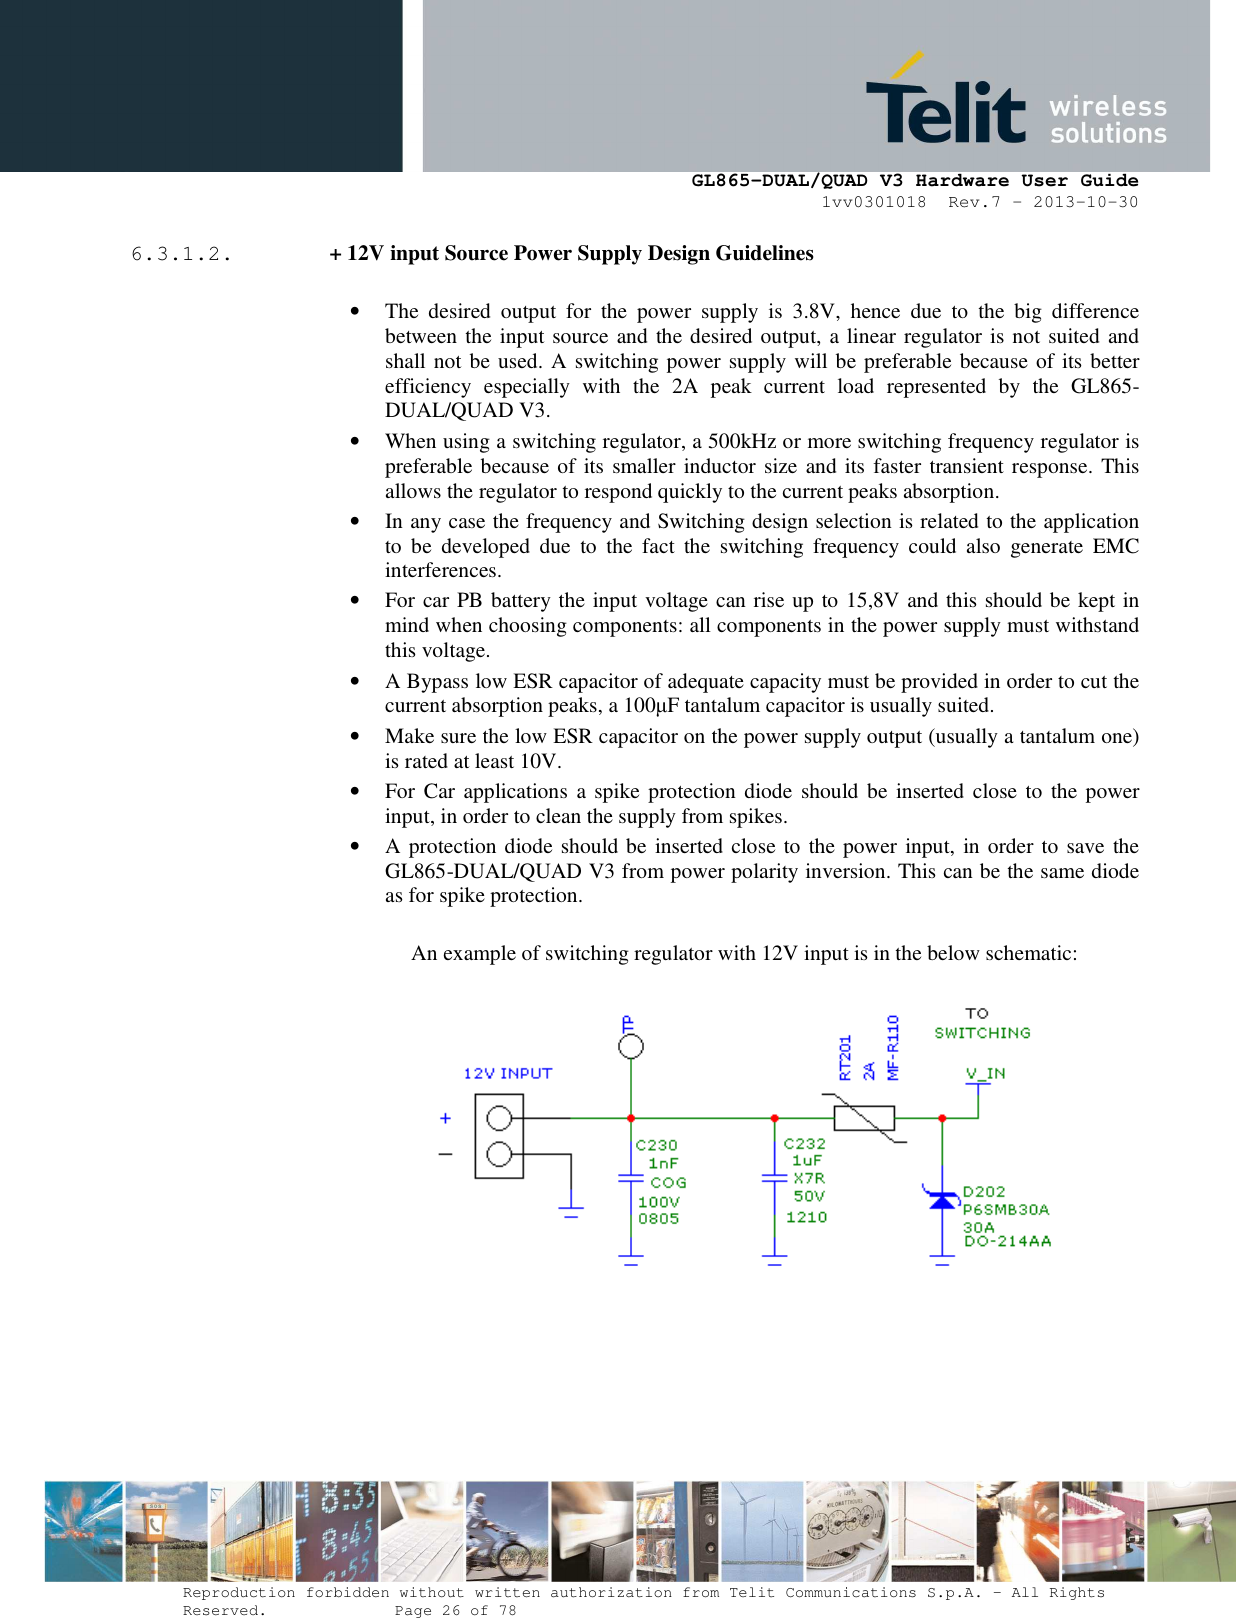      GL865-DUAL/QUAD V3 Hardware User Guide 1vv0301018  Rev.7 – 2013-10-30  Reproduction forbidden without written authorization from Telit Communications S.p.A. - All Rights Reserved.    Page 26 of 78 Mod. 0805 2011-07 Rev.2 6.3.1.2.  + 12V input Source Power Supply Design Guidelines  • The  desired  output  for  the  power  supply  is  3.8V,  hence  due  to  the  big  difference between the input source and the desired output, a linear regulator is not suited and shall not be used. A switching power supply will be preferable because of its better efficiency  especially  with  the  2A  peak  current  load  represented  by  the  GL865-DUAL/QUAD V3. • When using a switching regulator, a 500kHz or more switching frequency regulator is preferable because of its smaller inductor size and its faster transient response. This allows the regulator to respond quickly to the current peaks absorption.  • In any case the frequency and Switching design selection is related to the application to  be  developed  due  to  the  fact  the  switching  frequency  could  also  generate  EMC interferences. • For car PB battery the input voltage can rise up to 15,8V and this should be kept in mind when choosing components: all components in the power supply must withstand this voltage. • A Bypass low ESR capacitor of adequate capacity must be provided in order to cut the current absorption peaks, a 100µF tantalum capacitor is usually suited. • Make sure the low ESR capacitor on the power supply output (usually a tantalum one) is rated at least 10V. • For Car applications a spike protection diode  should  be inserted  close  to the power input, in order to clean the supply from spikes.  • A protection diode should be inserted close to the power input, in order to save the GL865-DUAL/QUAD V3 from power polarity inversion. This can be the same diode as for spike protection.  An example of switching regulator with 12V input is in the below schematic:      